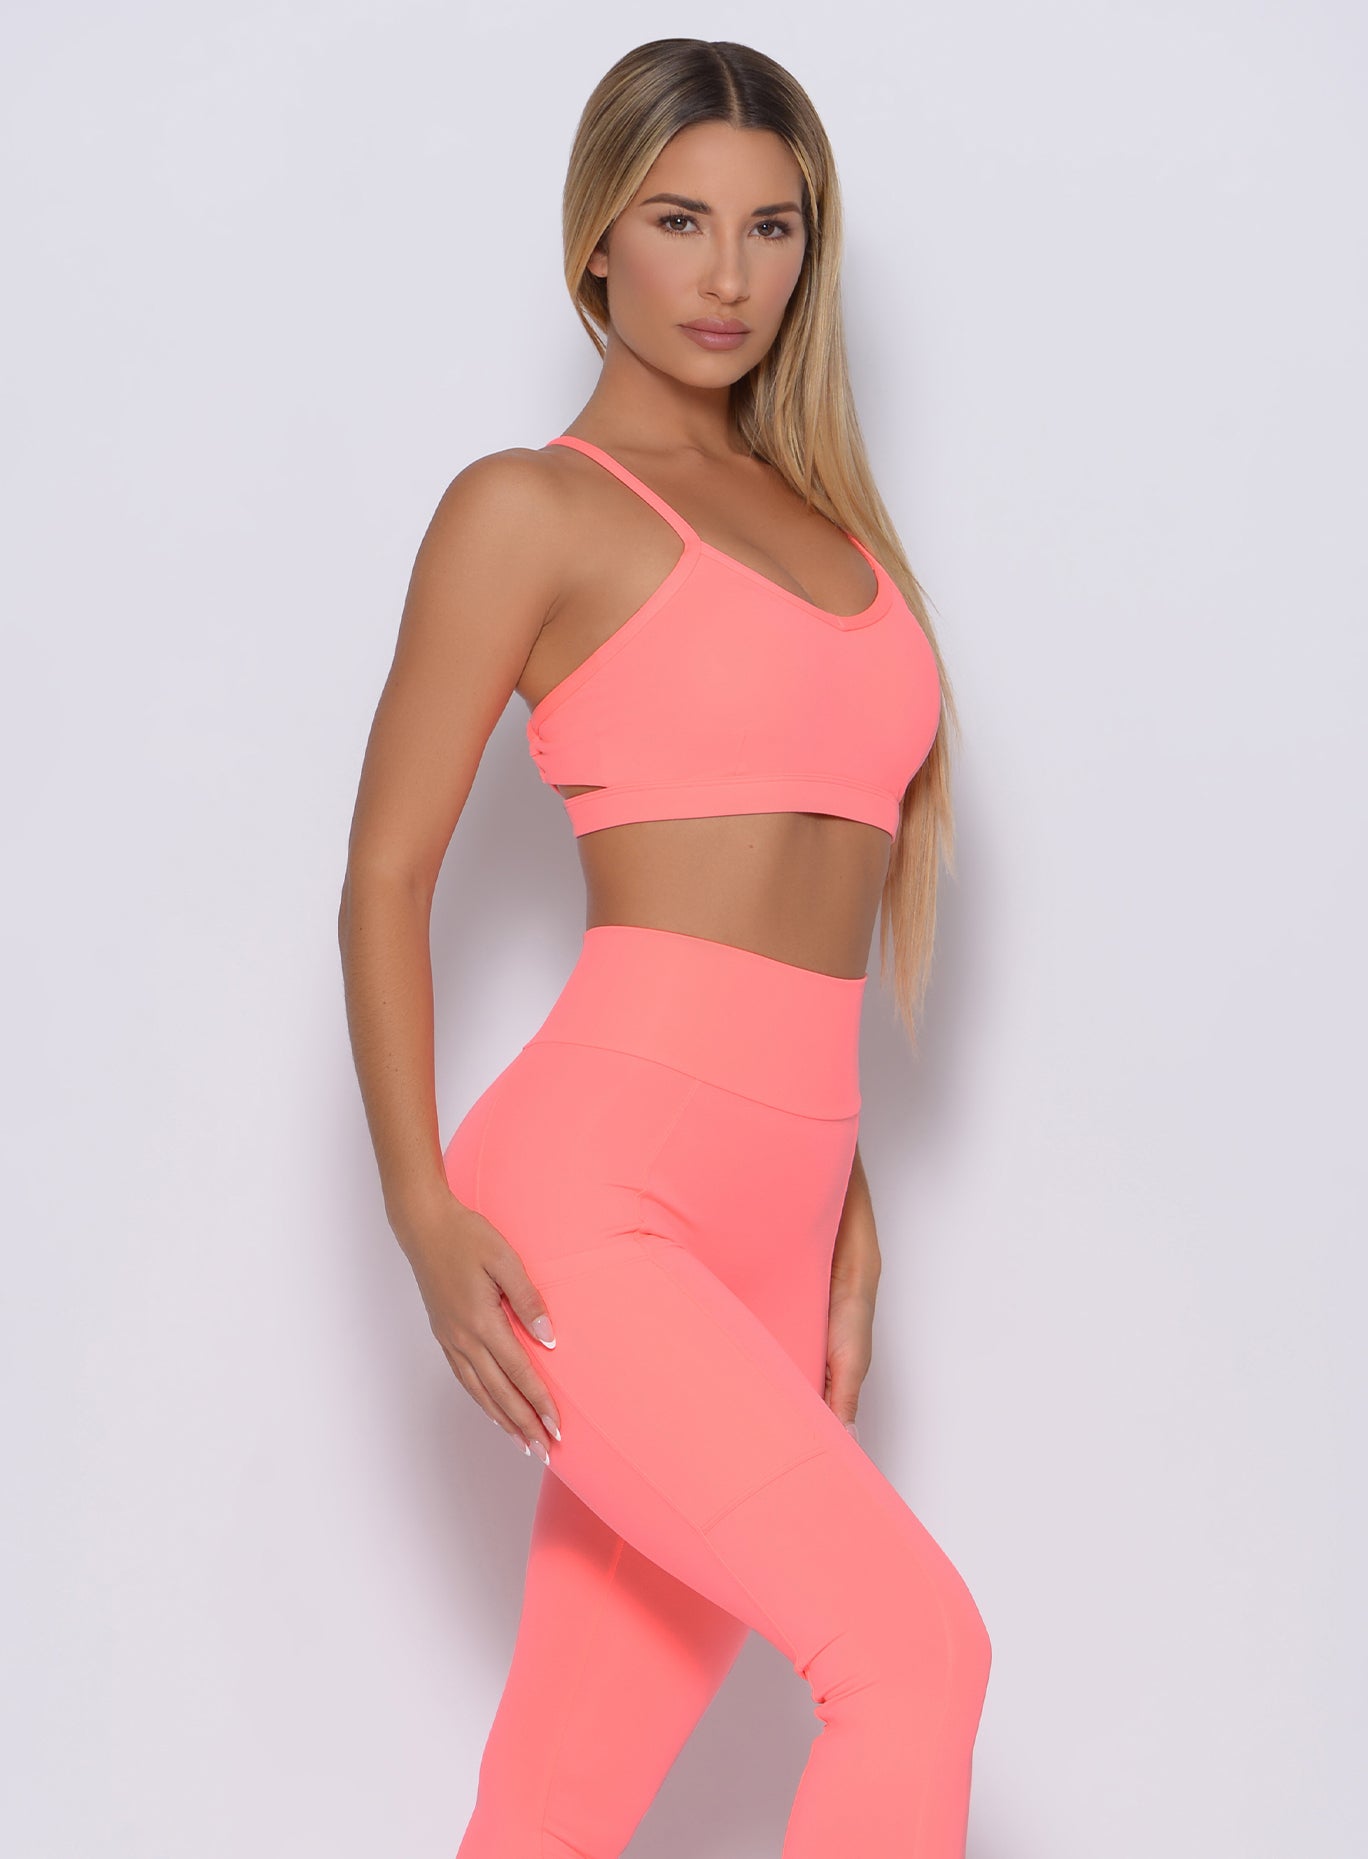 Right side profile view of a model in our pumped sports bra in wild peach color and a matching leggings